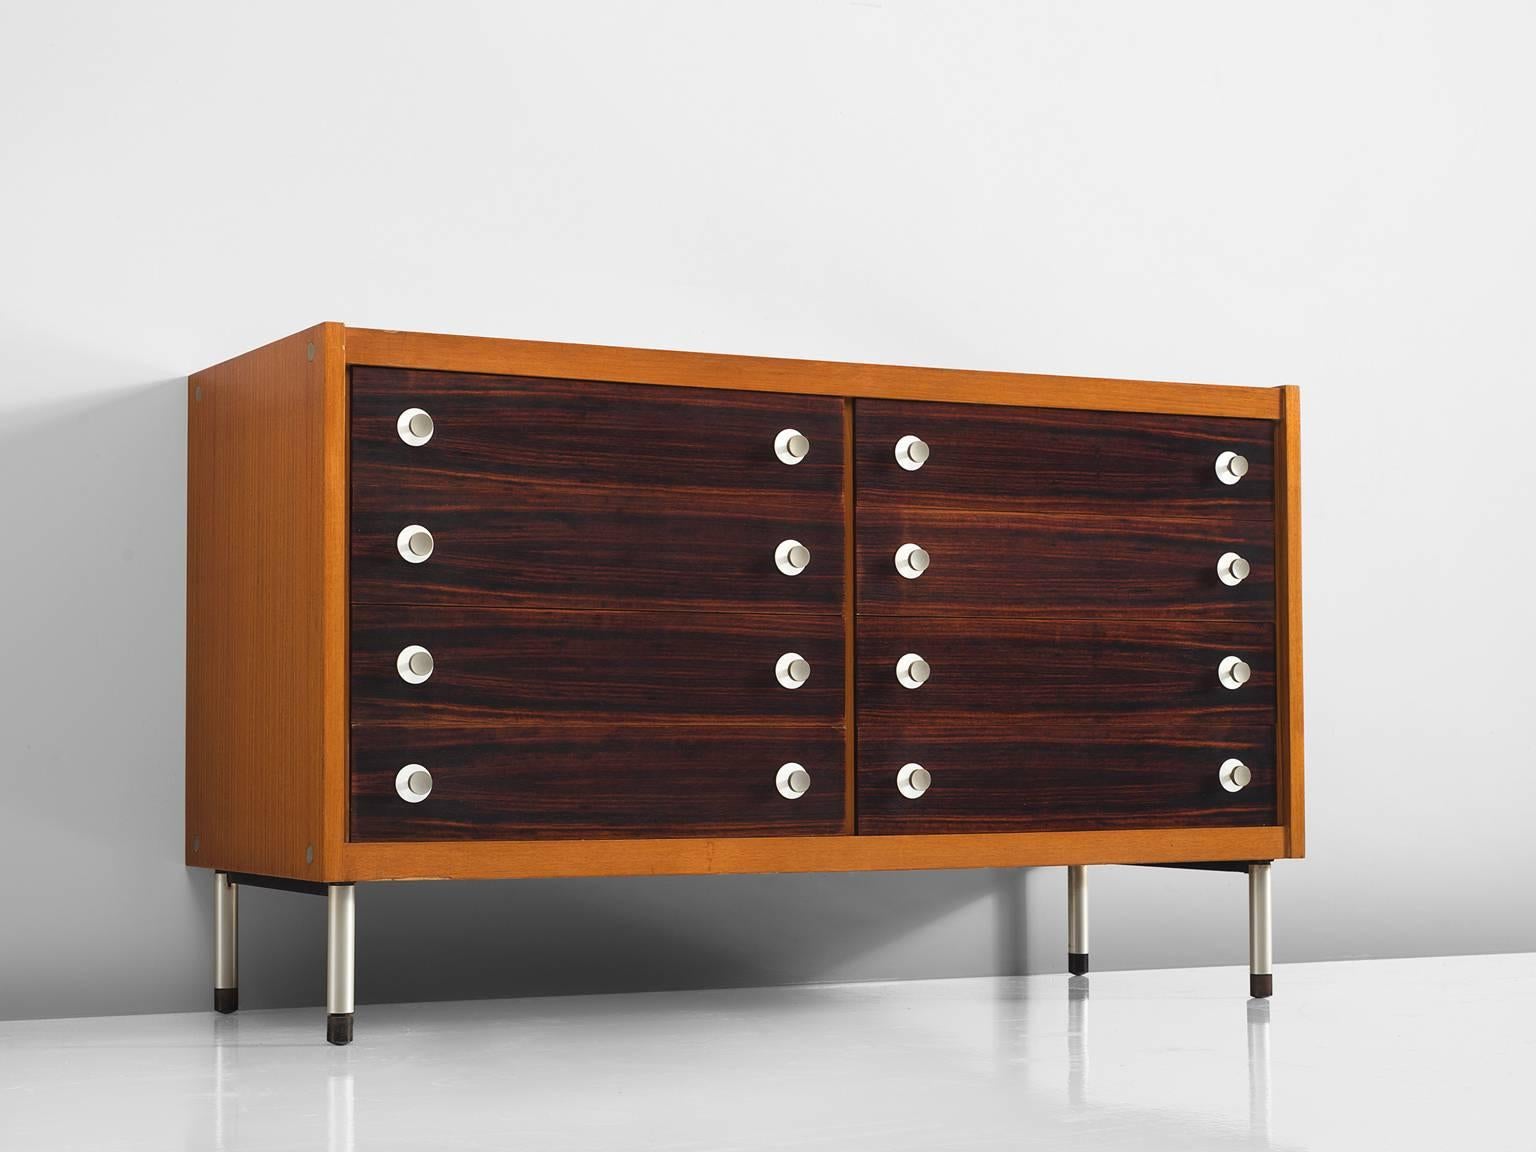 George Coslin, chest of drawers, teak and rosewood, metal, Italy, 1950s.

This Italian cabinet is part of the midcentury design collection. The cabinet is executed in teak and has eight drawers. The legs and handles are made of metal and are